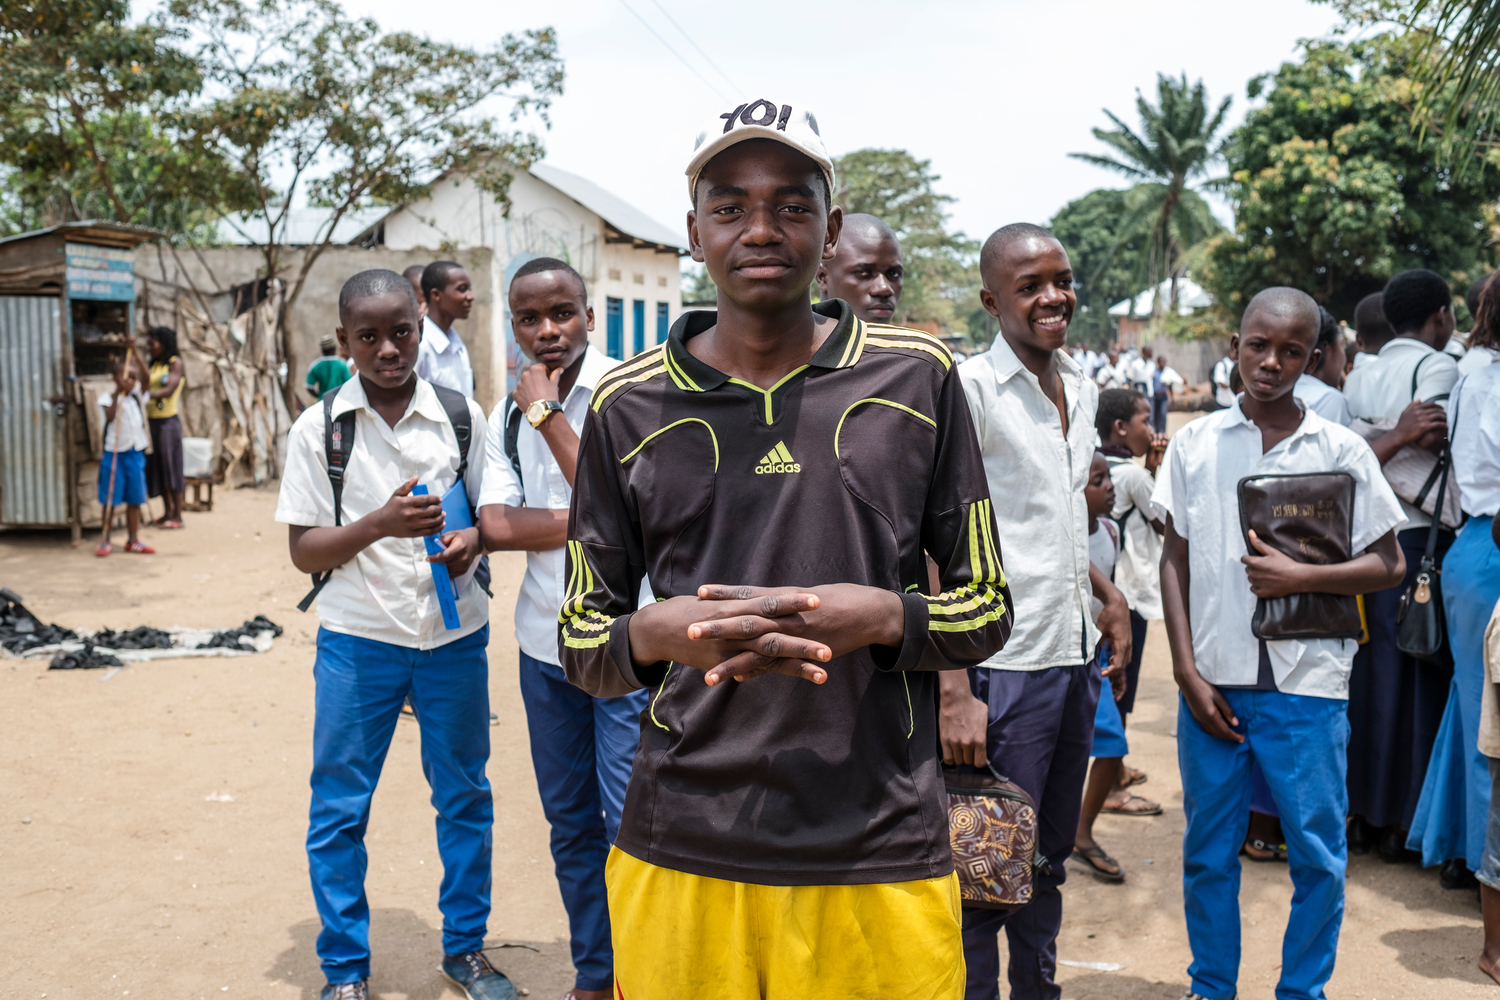 Democratic Republic of the Congo. A Burundian schoolboy adapts to life in a new country